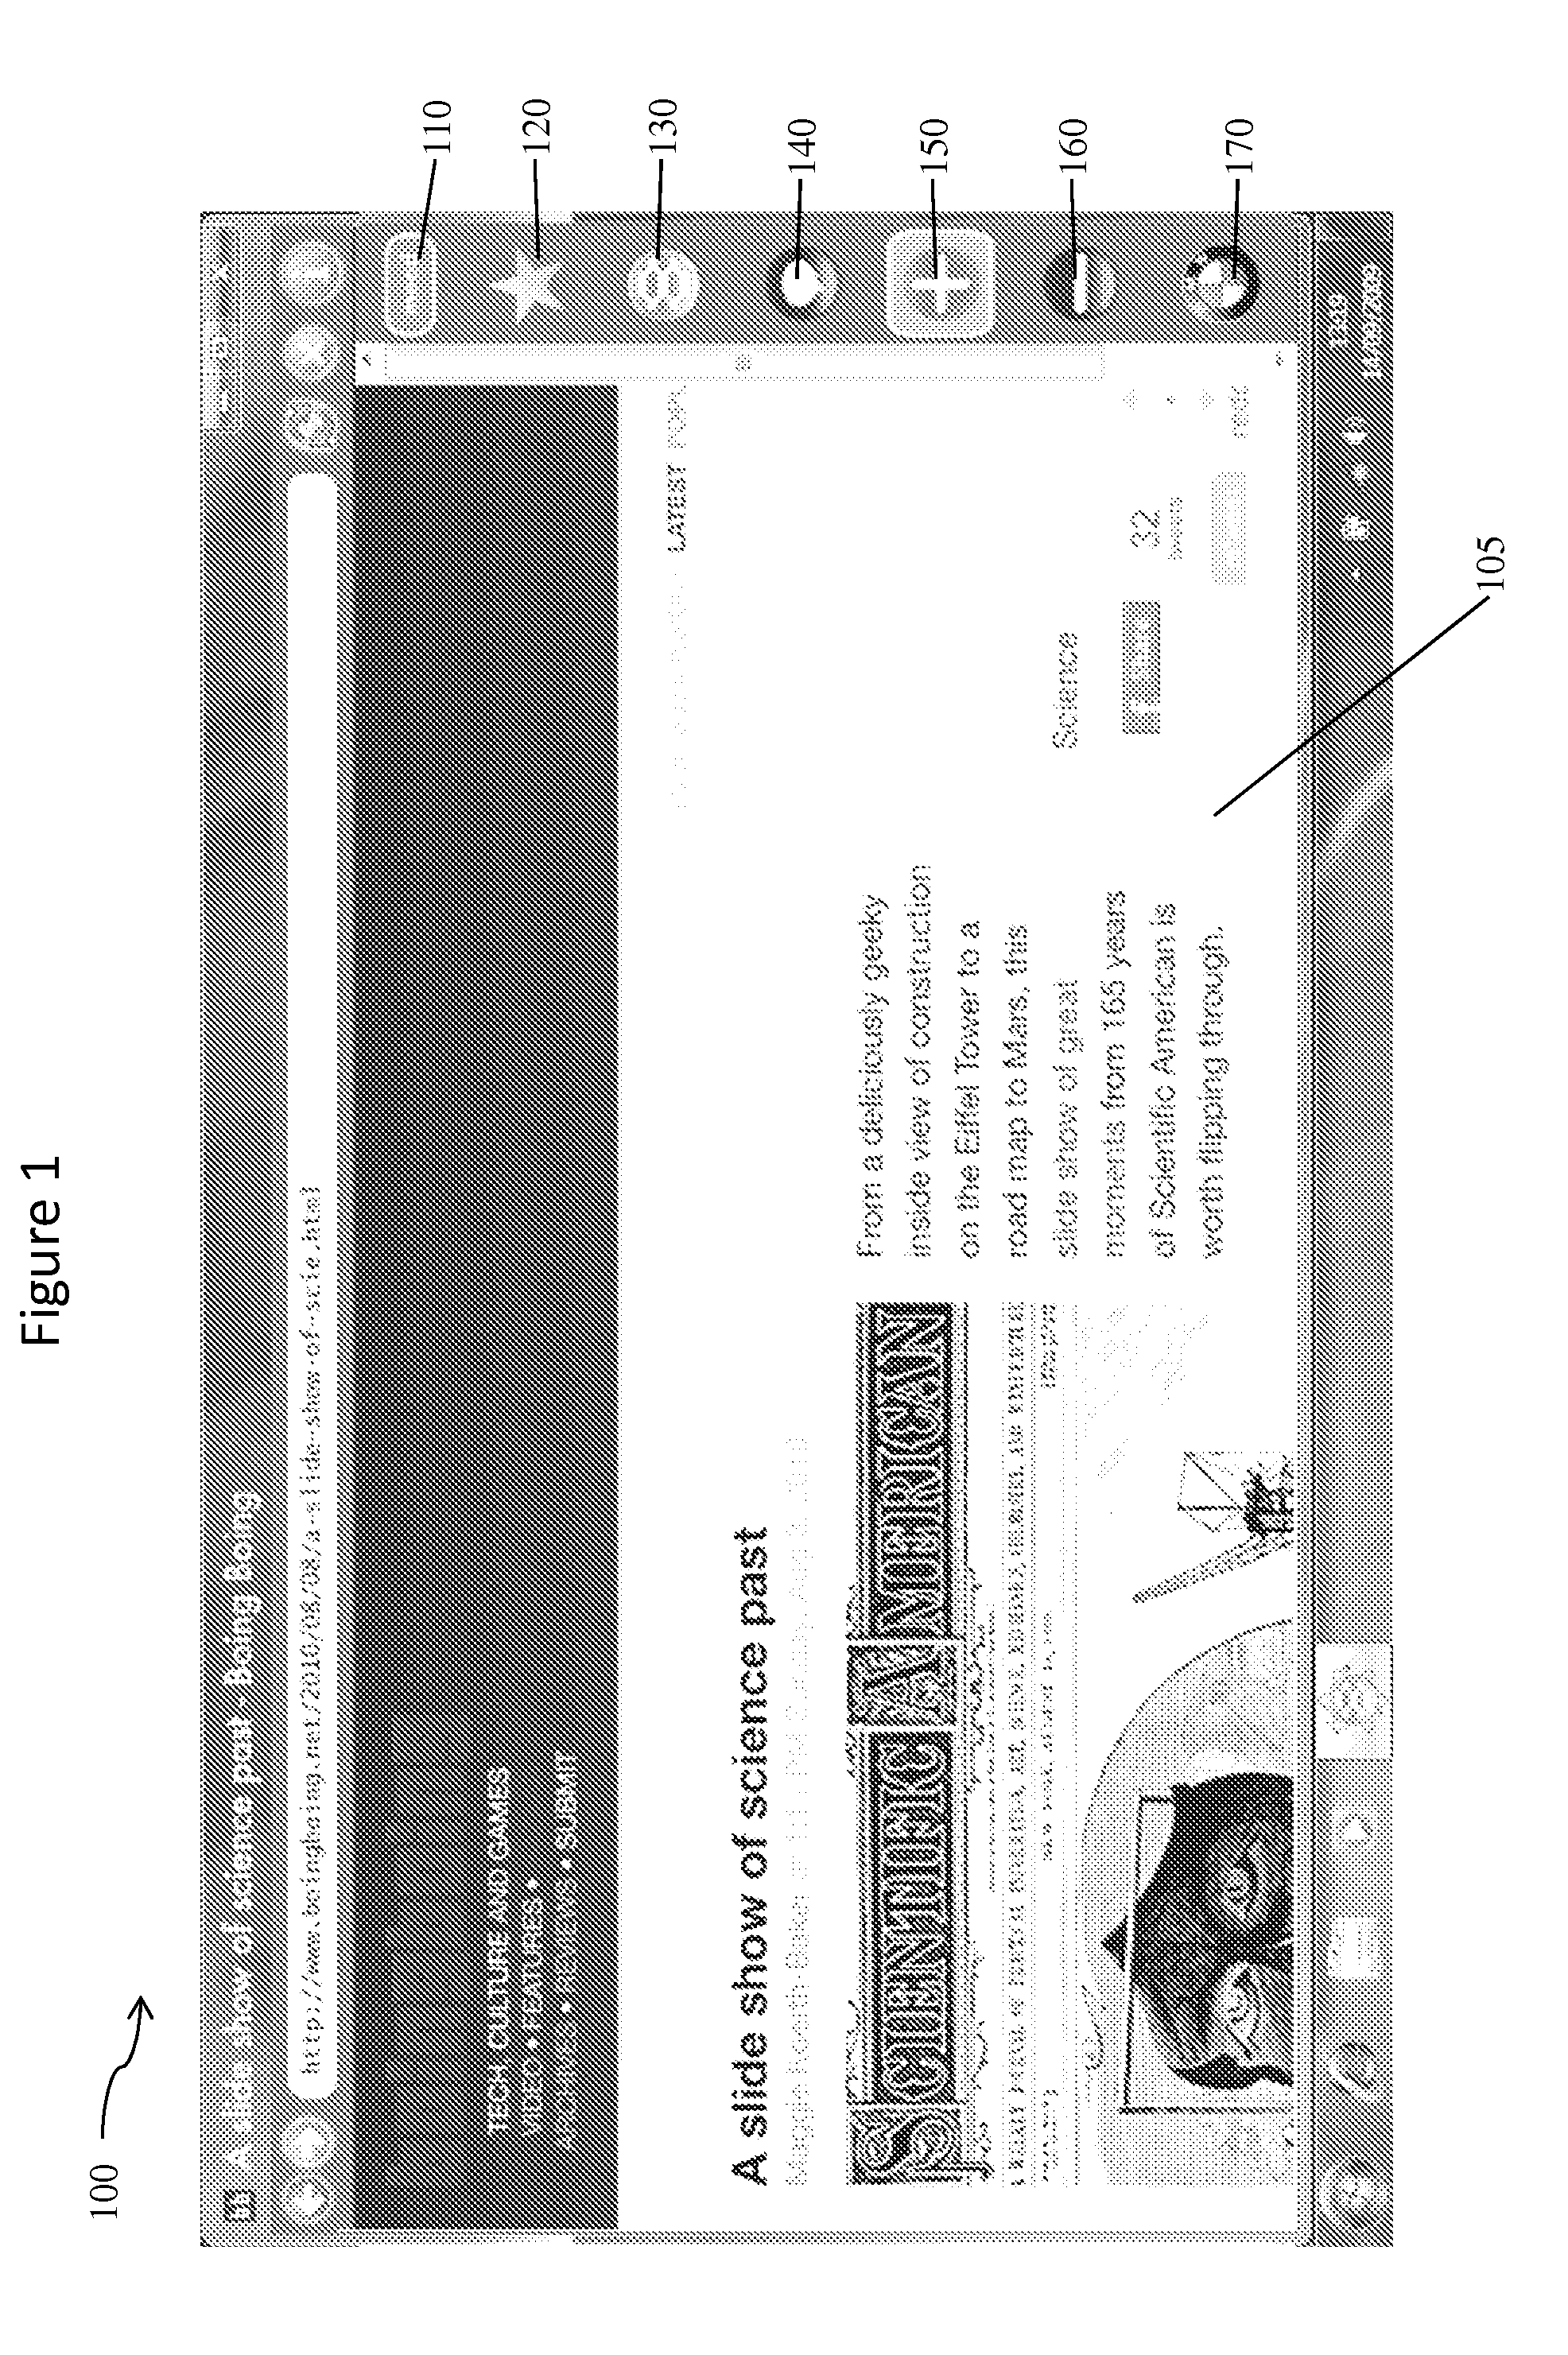 Survey Administration System and Methods